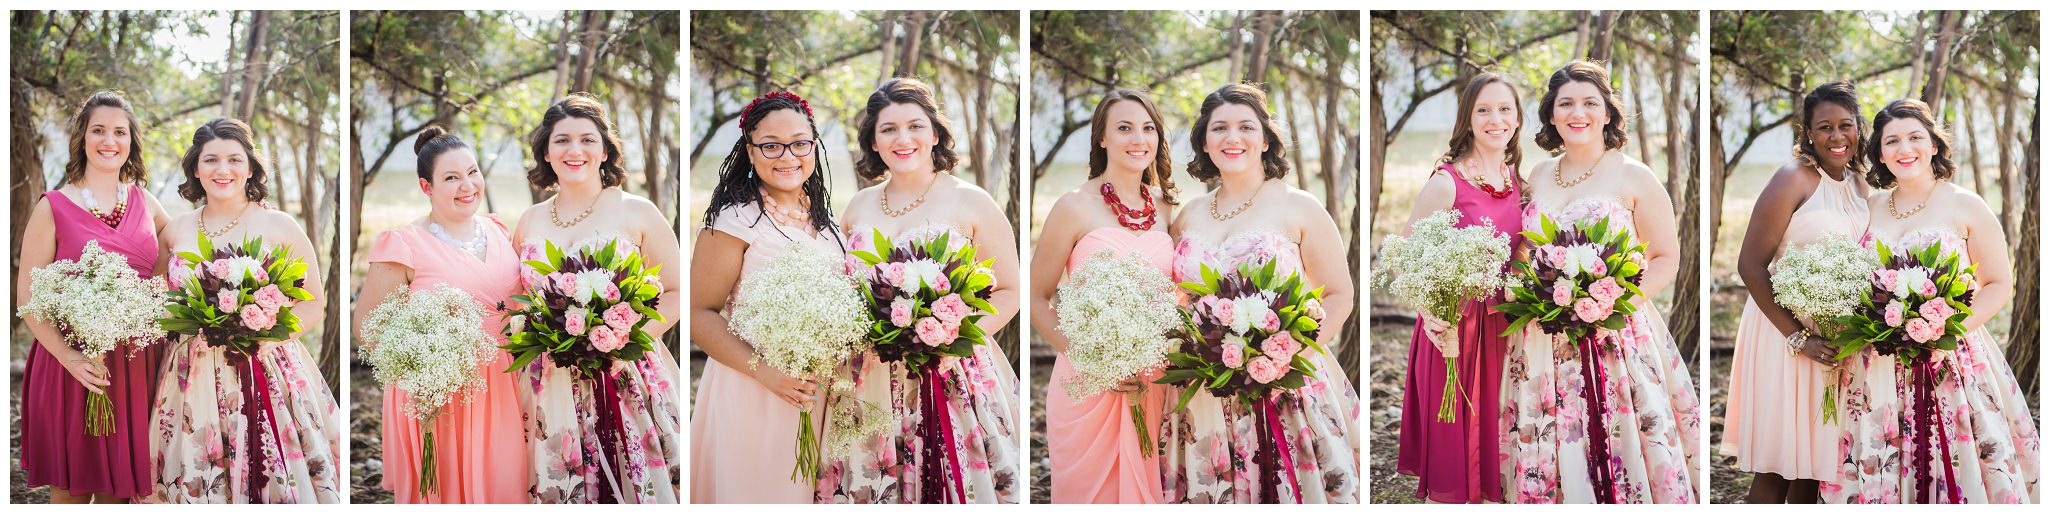 Kerrville Wedding Photographer Unique fun wedding with floral dress 0017